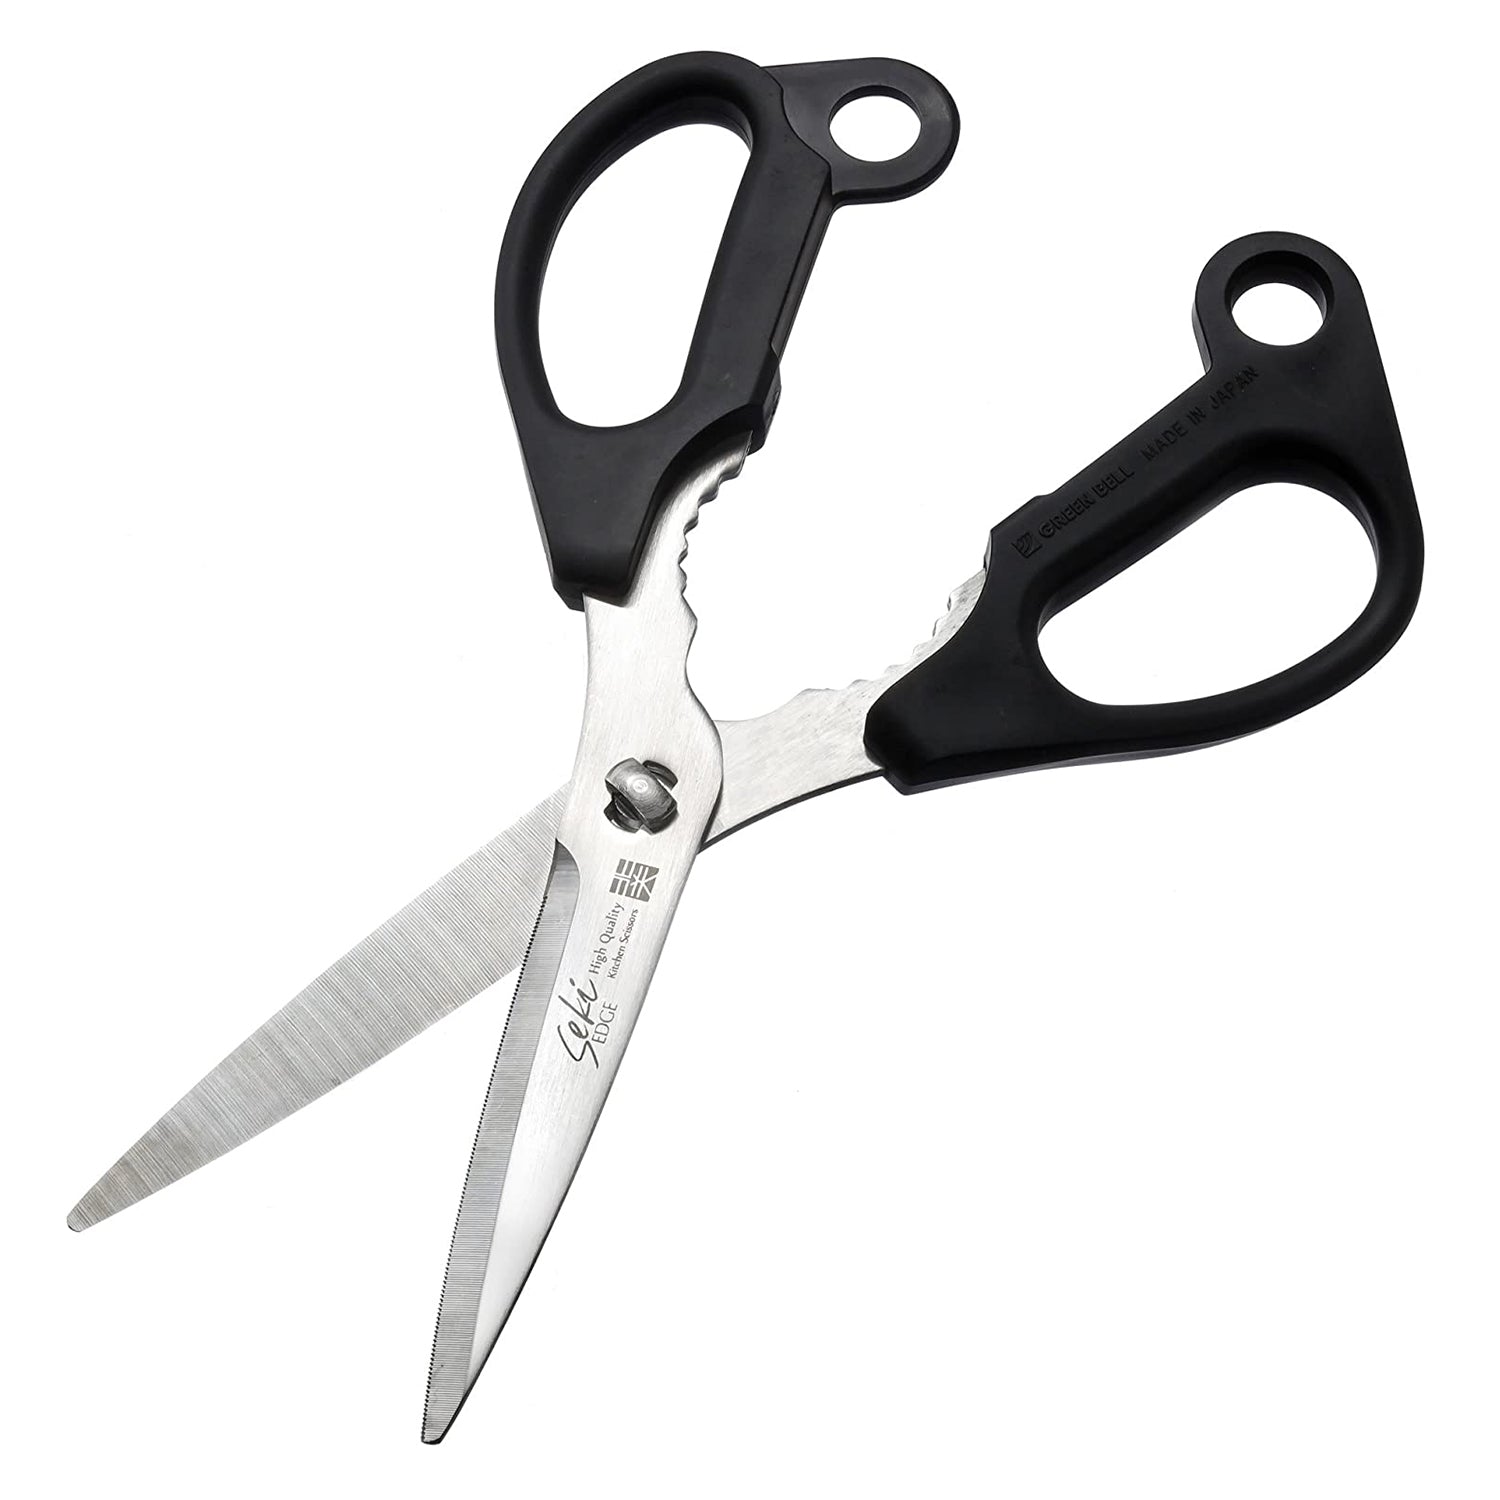  Yoshihiro All Stainless Steel Pull-Apart Japanese Kitchen Shears /Scissors 7.5 Inch (190mm) - Made in Japan: Home & Kitchen